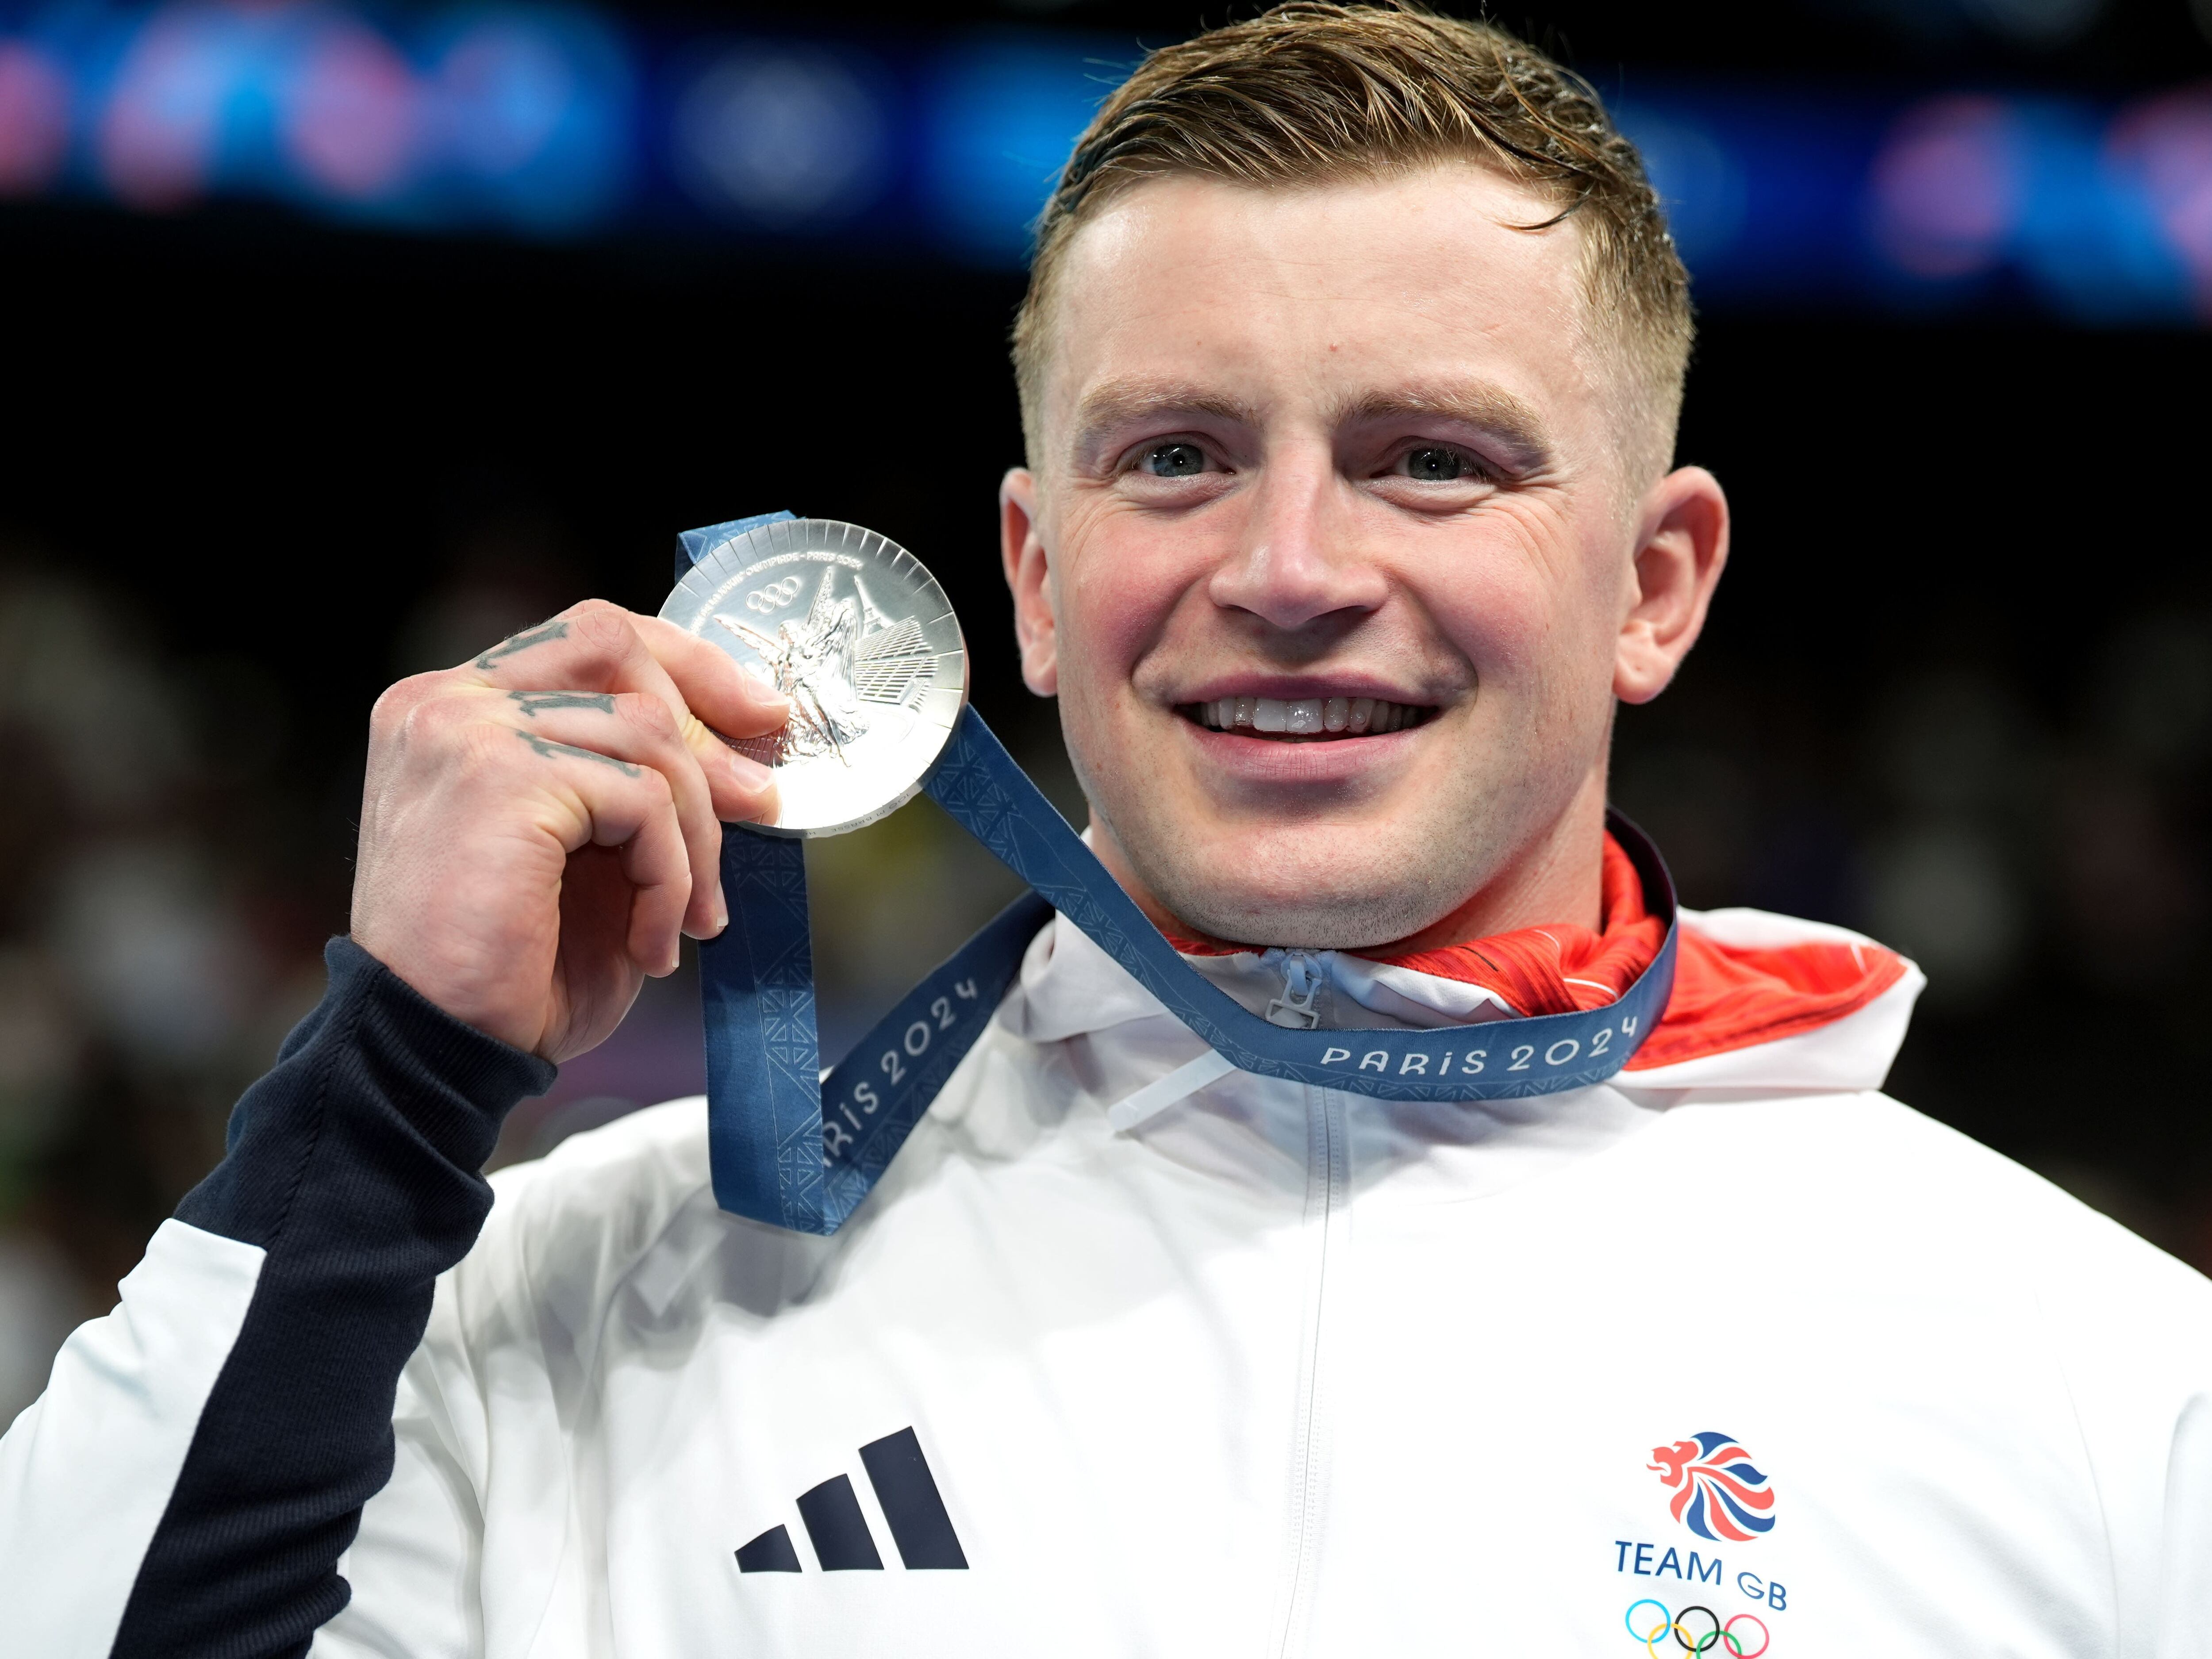 Adam Peaty cries ‘happy tears’ after narrowly missing out on another gold medal